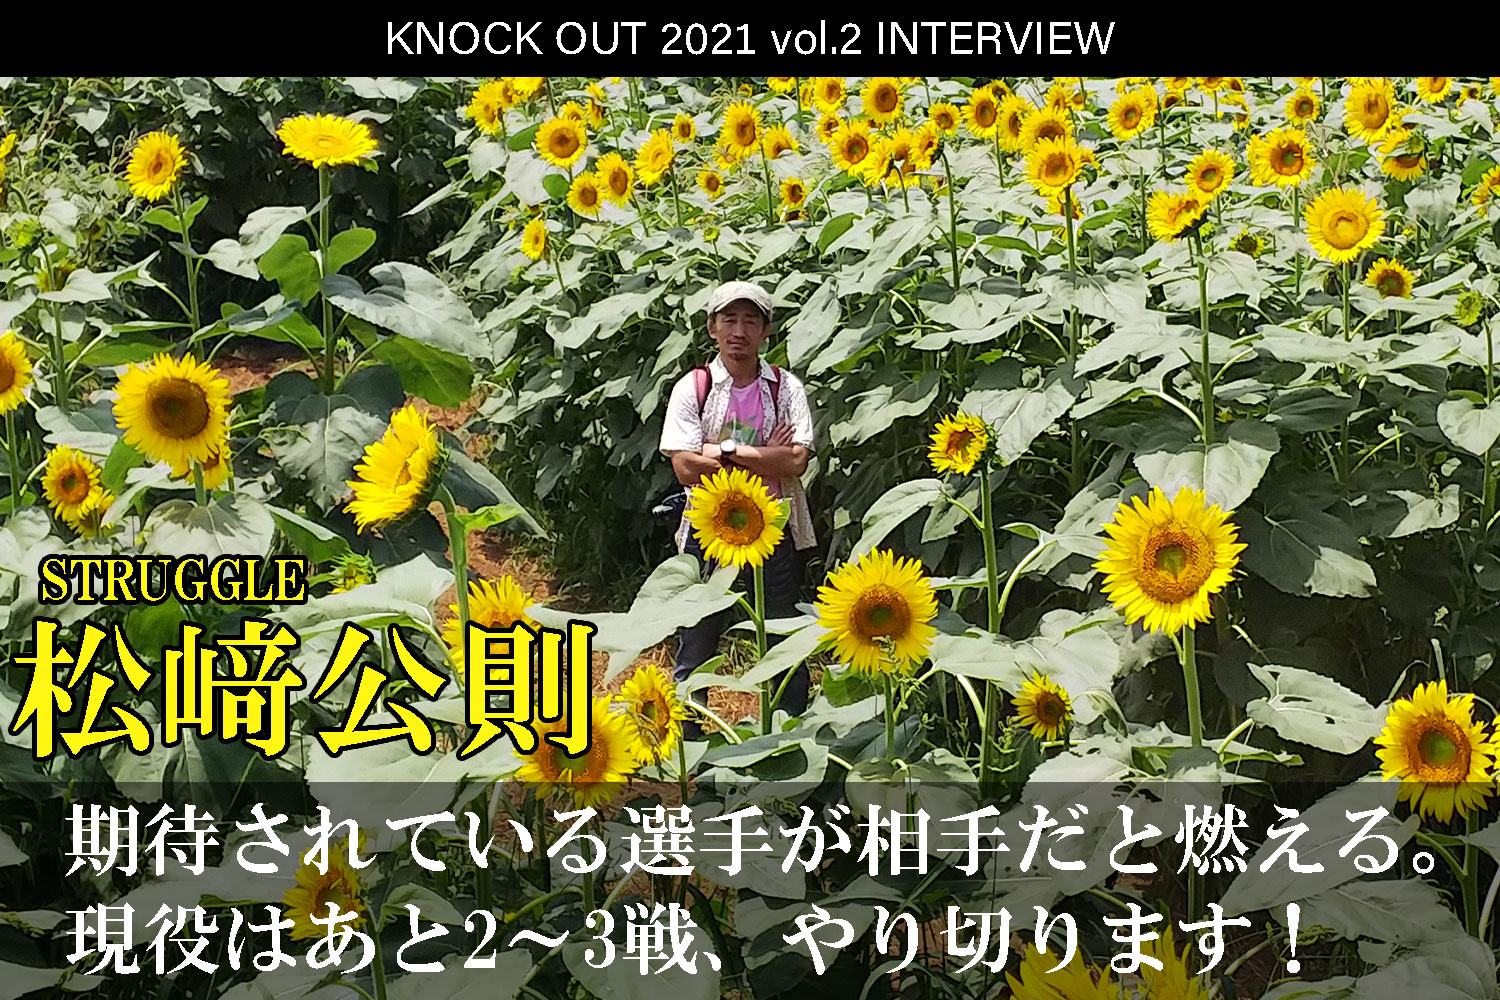 4.25 KNOCK OUT 2021 vol.2｜松﨑公則インタビュー公開！